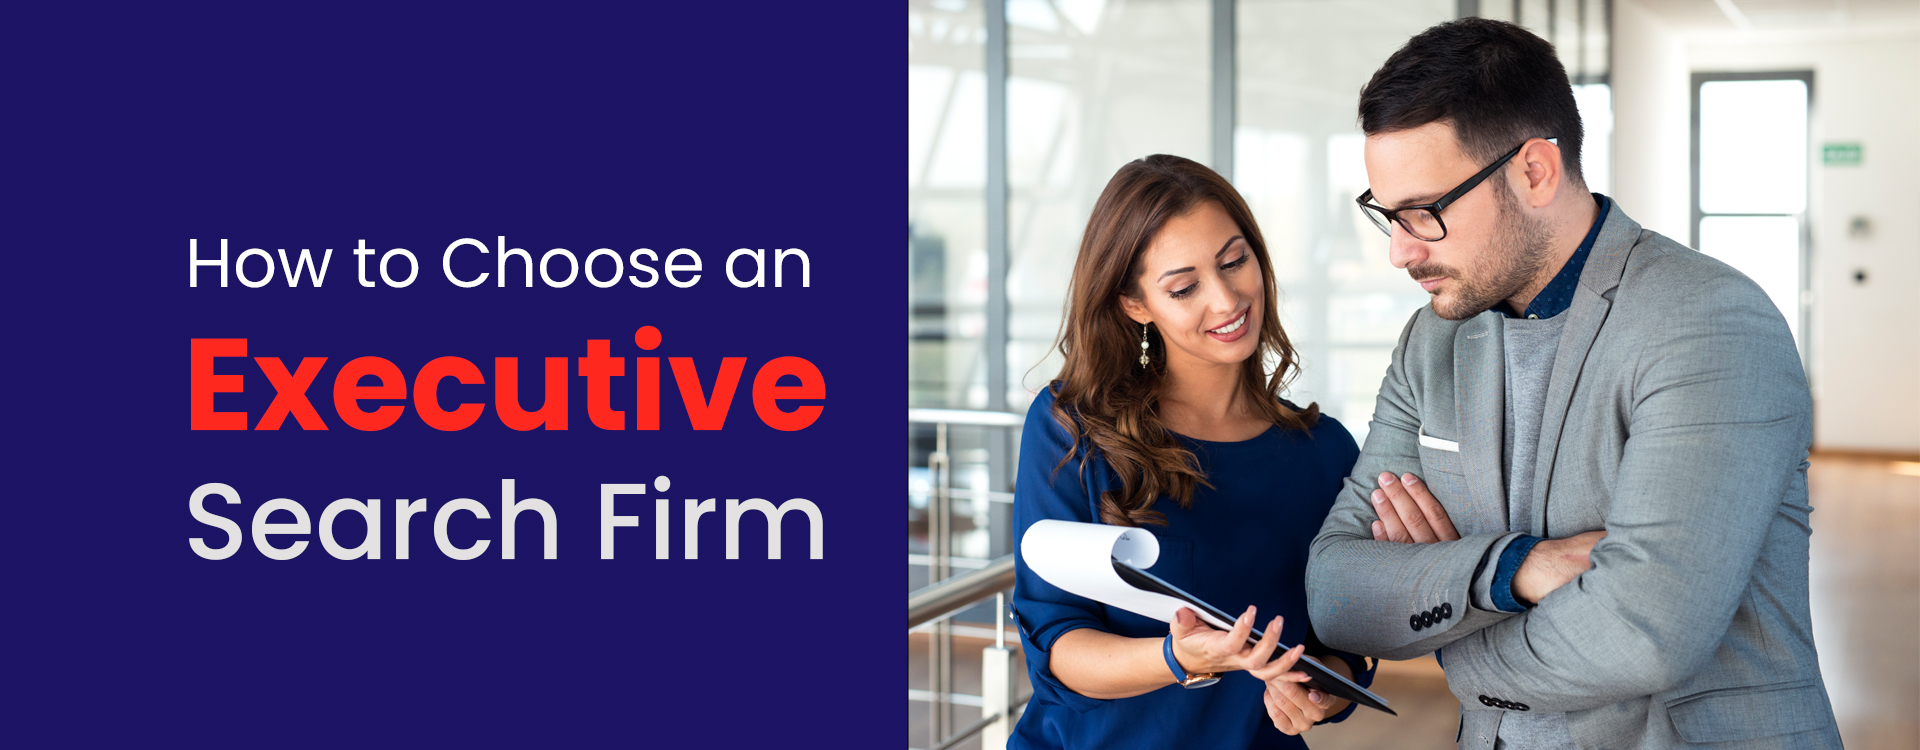 How to Choose an Executive Search Firm